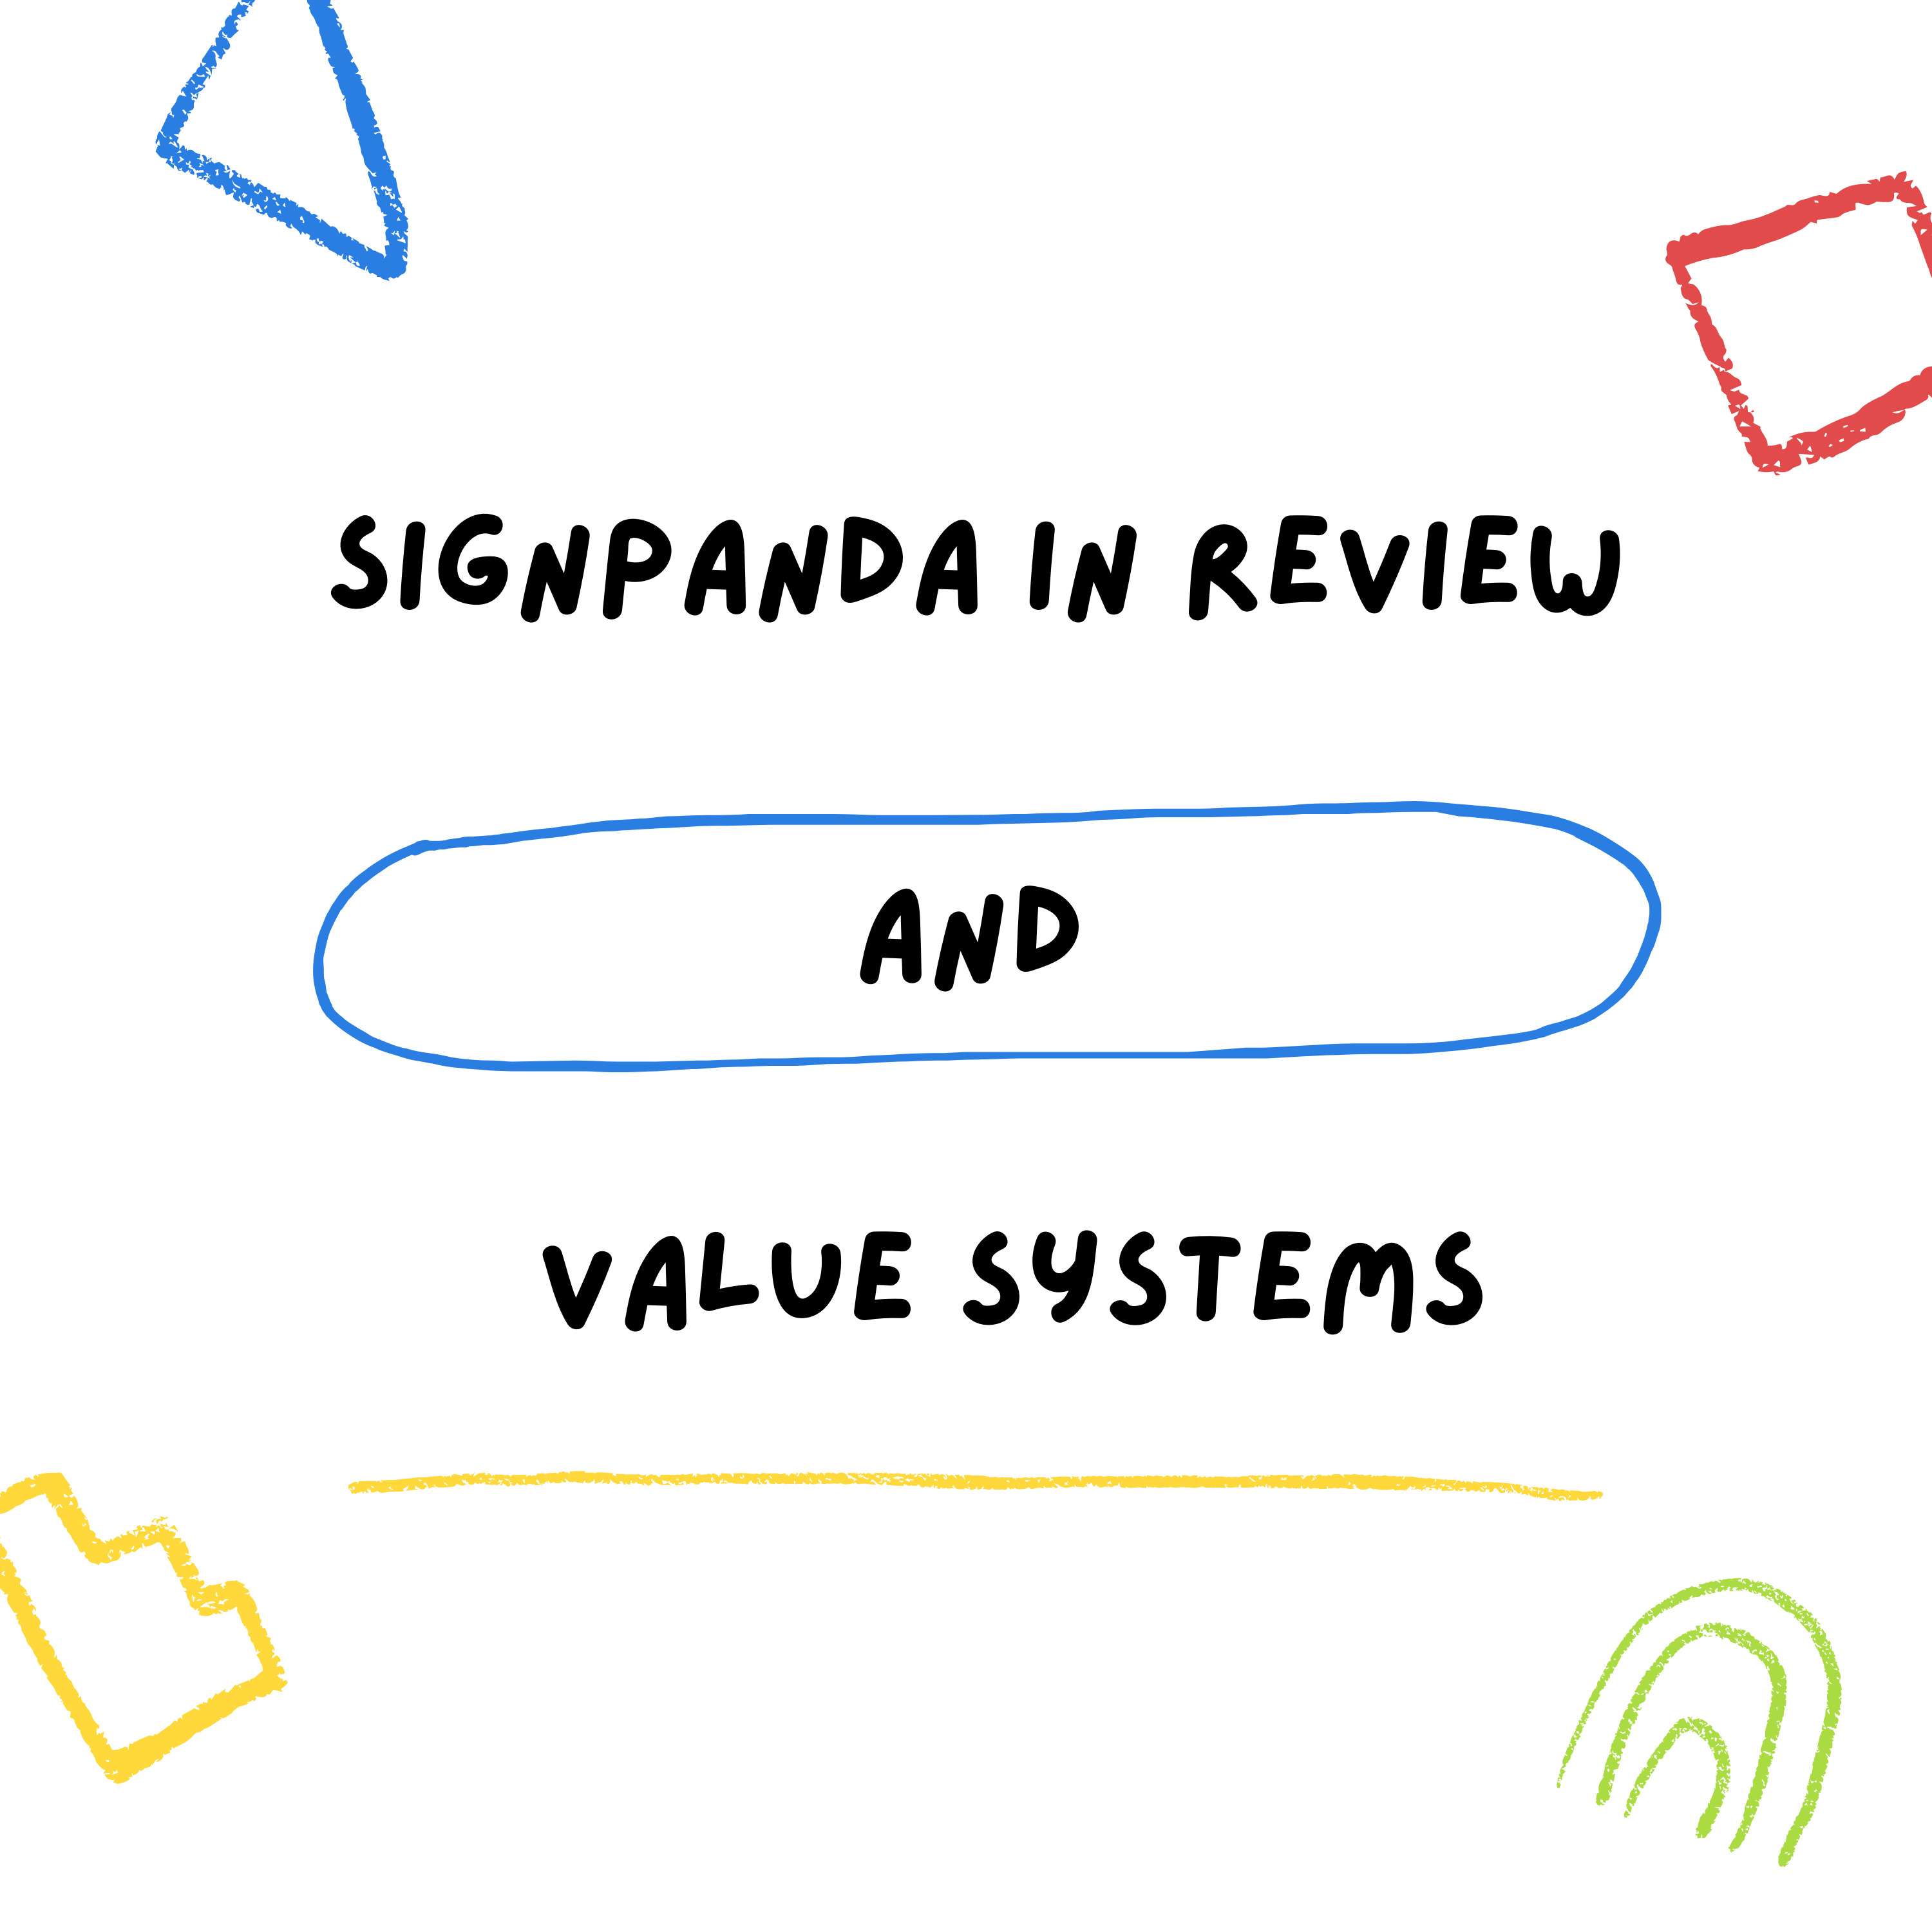 Signpanda in Review and Value Systems